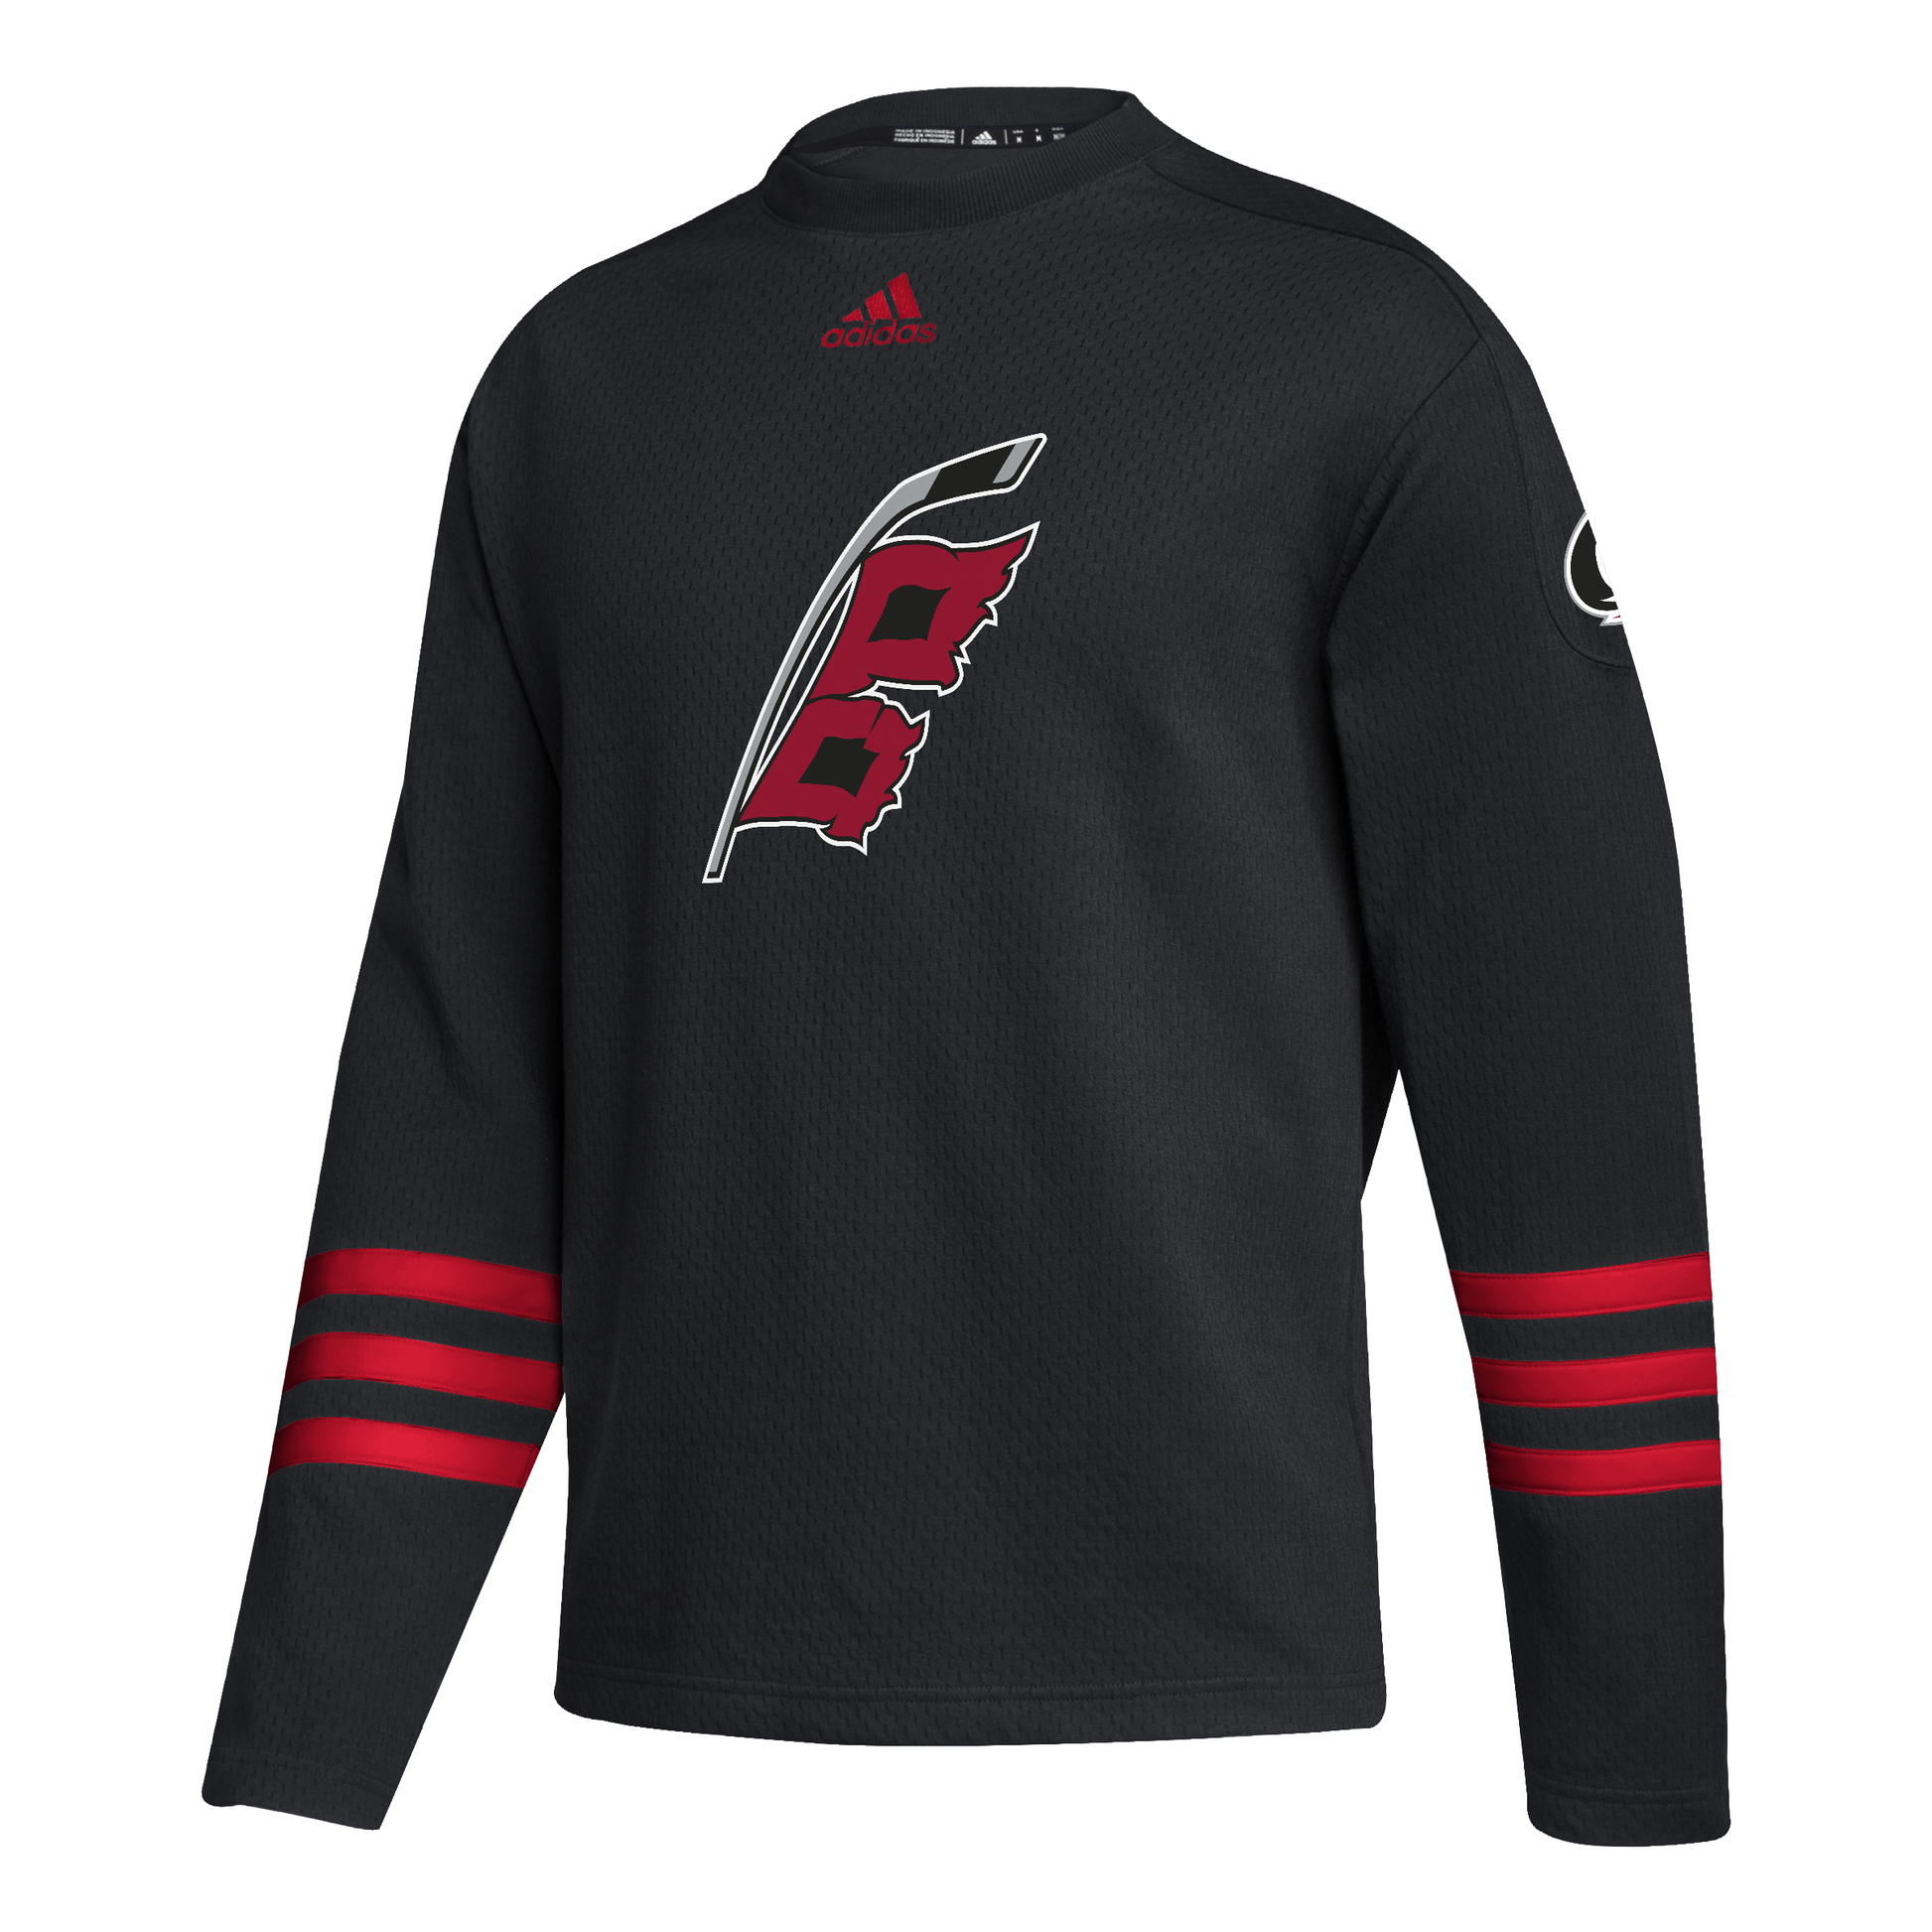 Front View: Sweater with Hurricanes flag logo on chest and red stripes on sleeves.